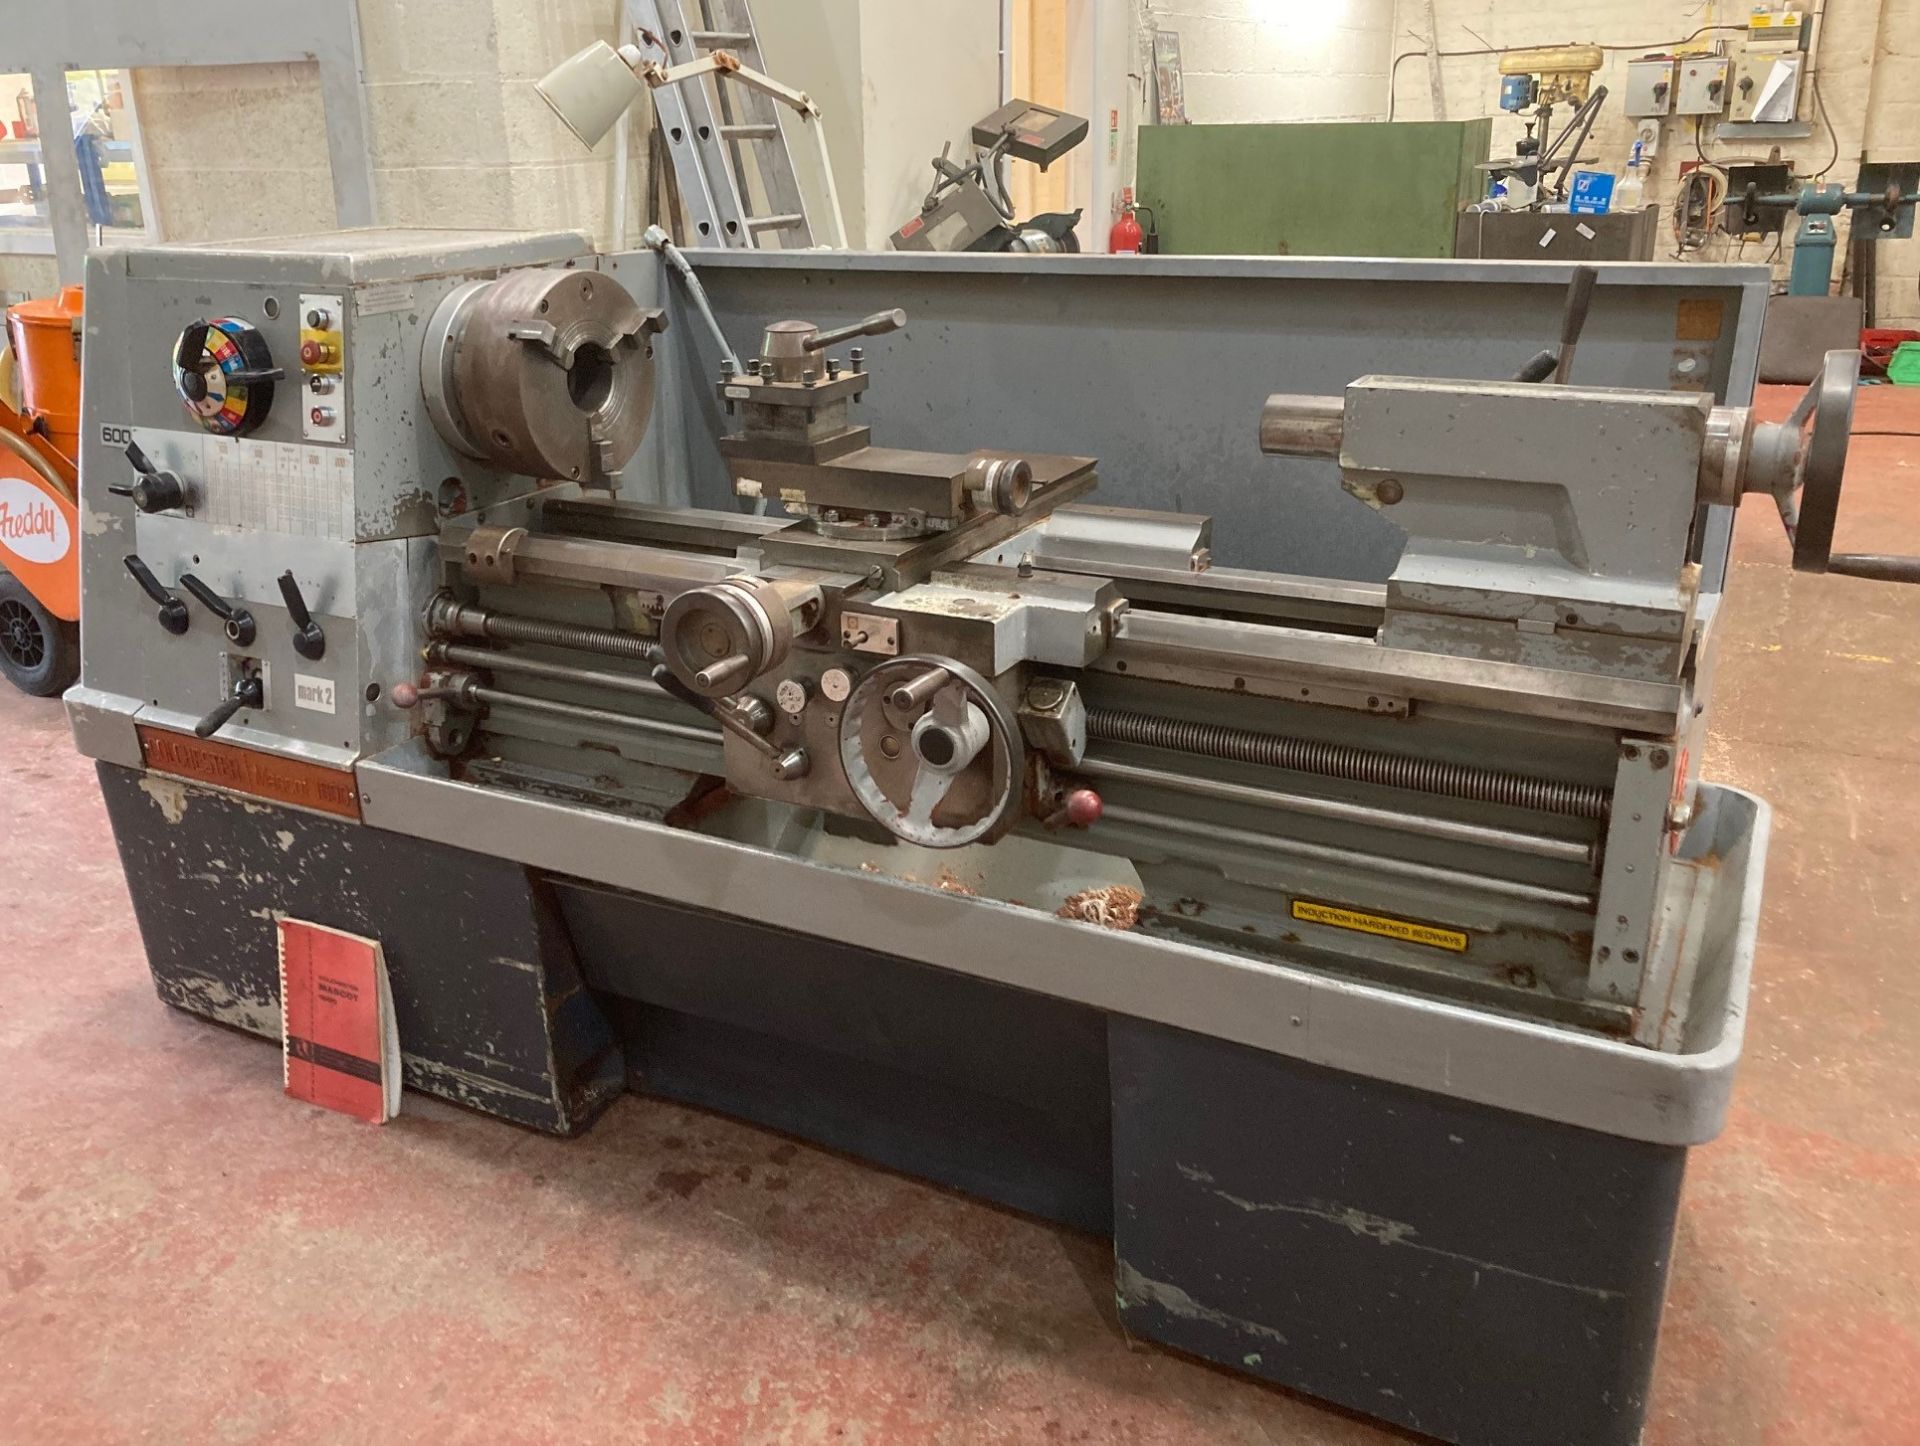 Colchester Mascot 1600 MK II Gap Bed Lathe x 40” (1000mm) - Image 2 of 6